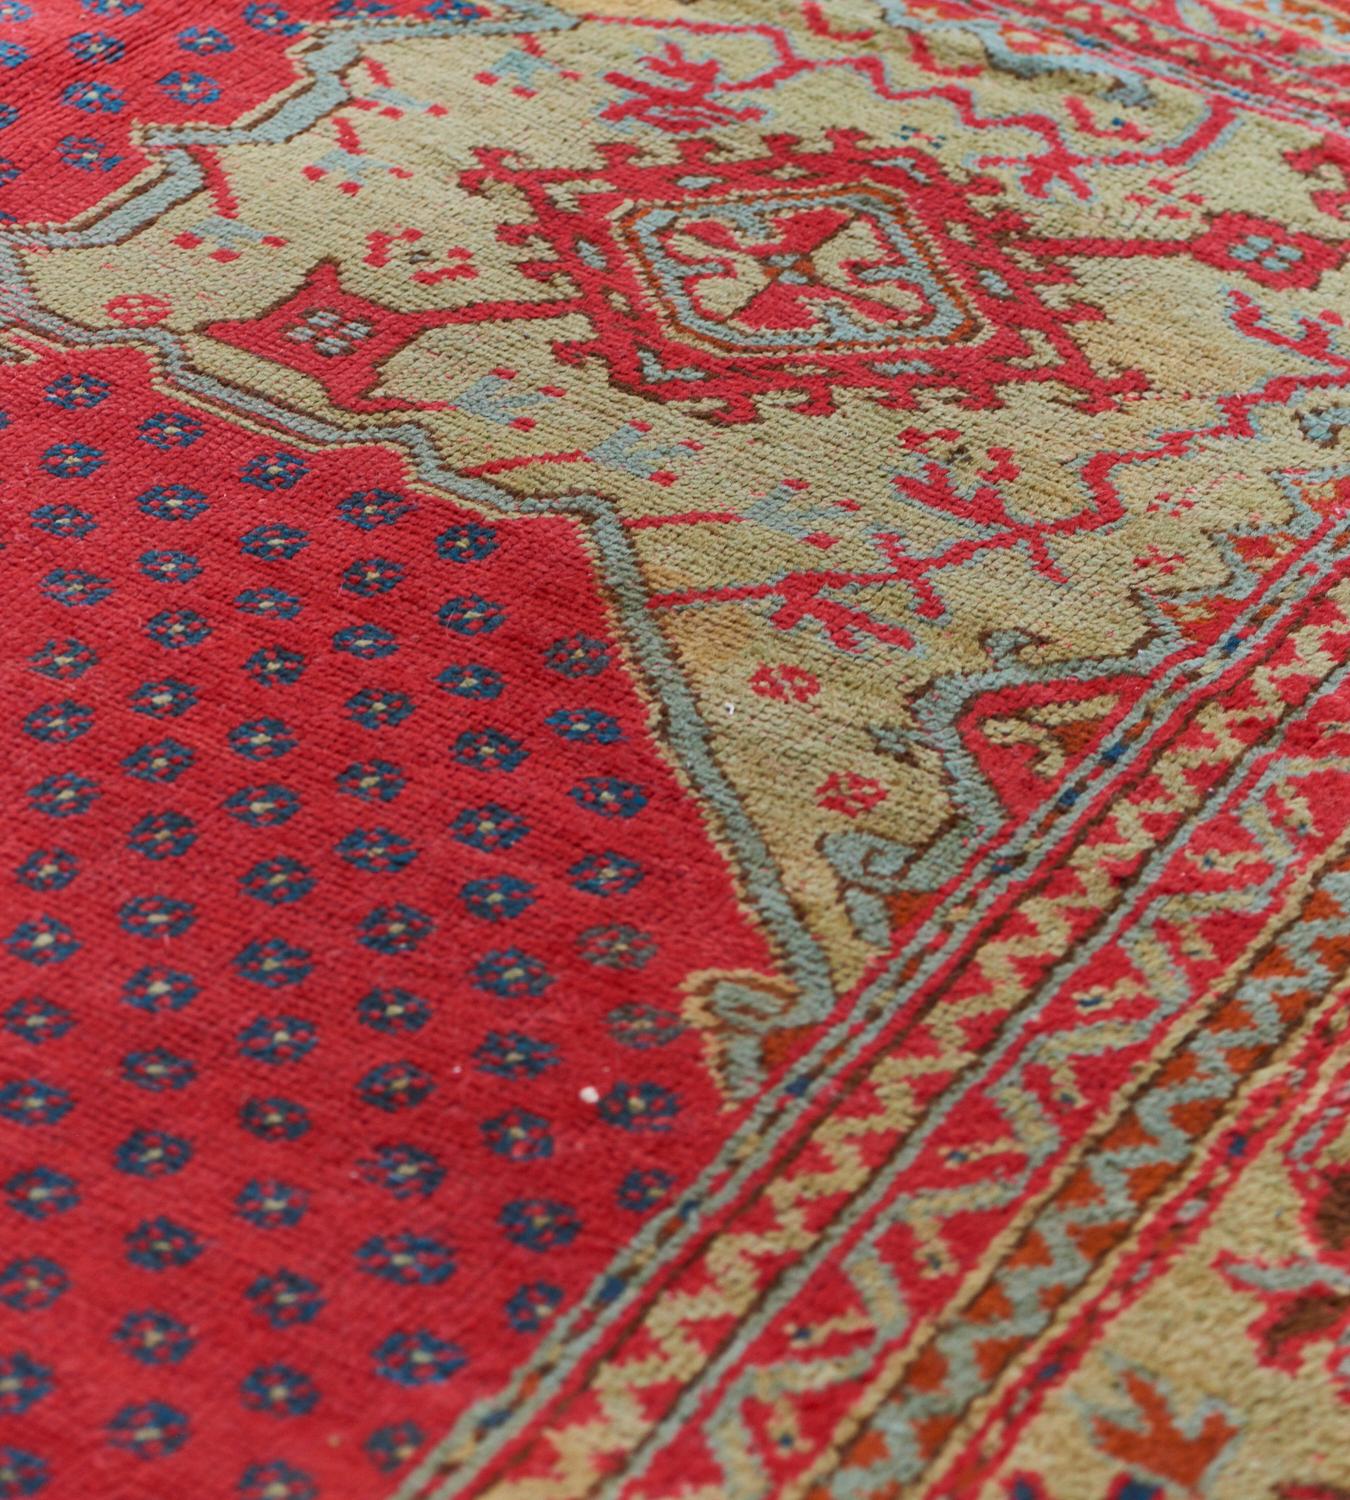 This antique Oushak rug has a tomato-red field scattered with tiny blue roundels around a central pistachio-green and light blue lozenge medallion with a cherry-red central lozenge issuing angular floral vine and shield lozenges and further